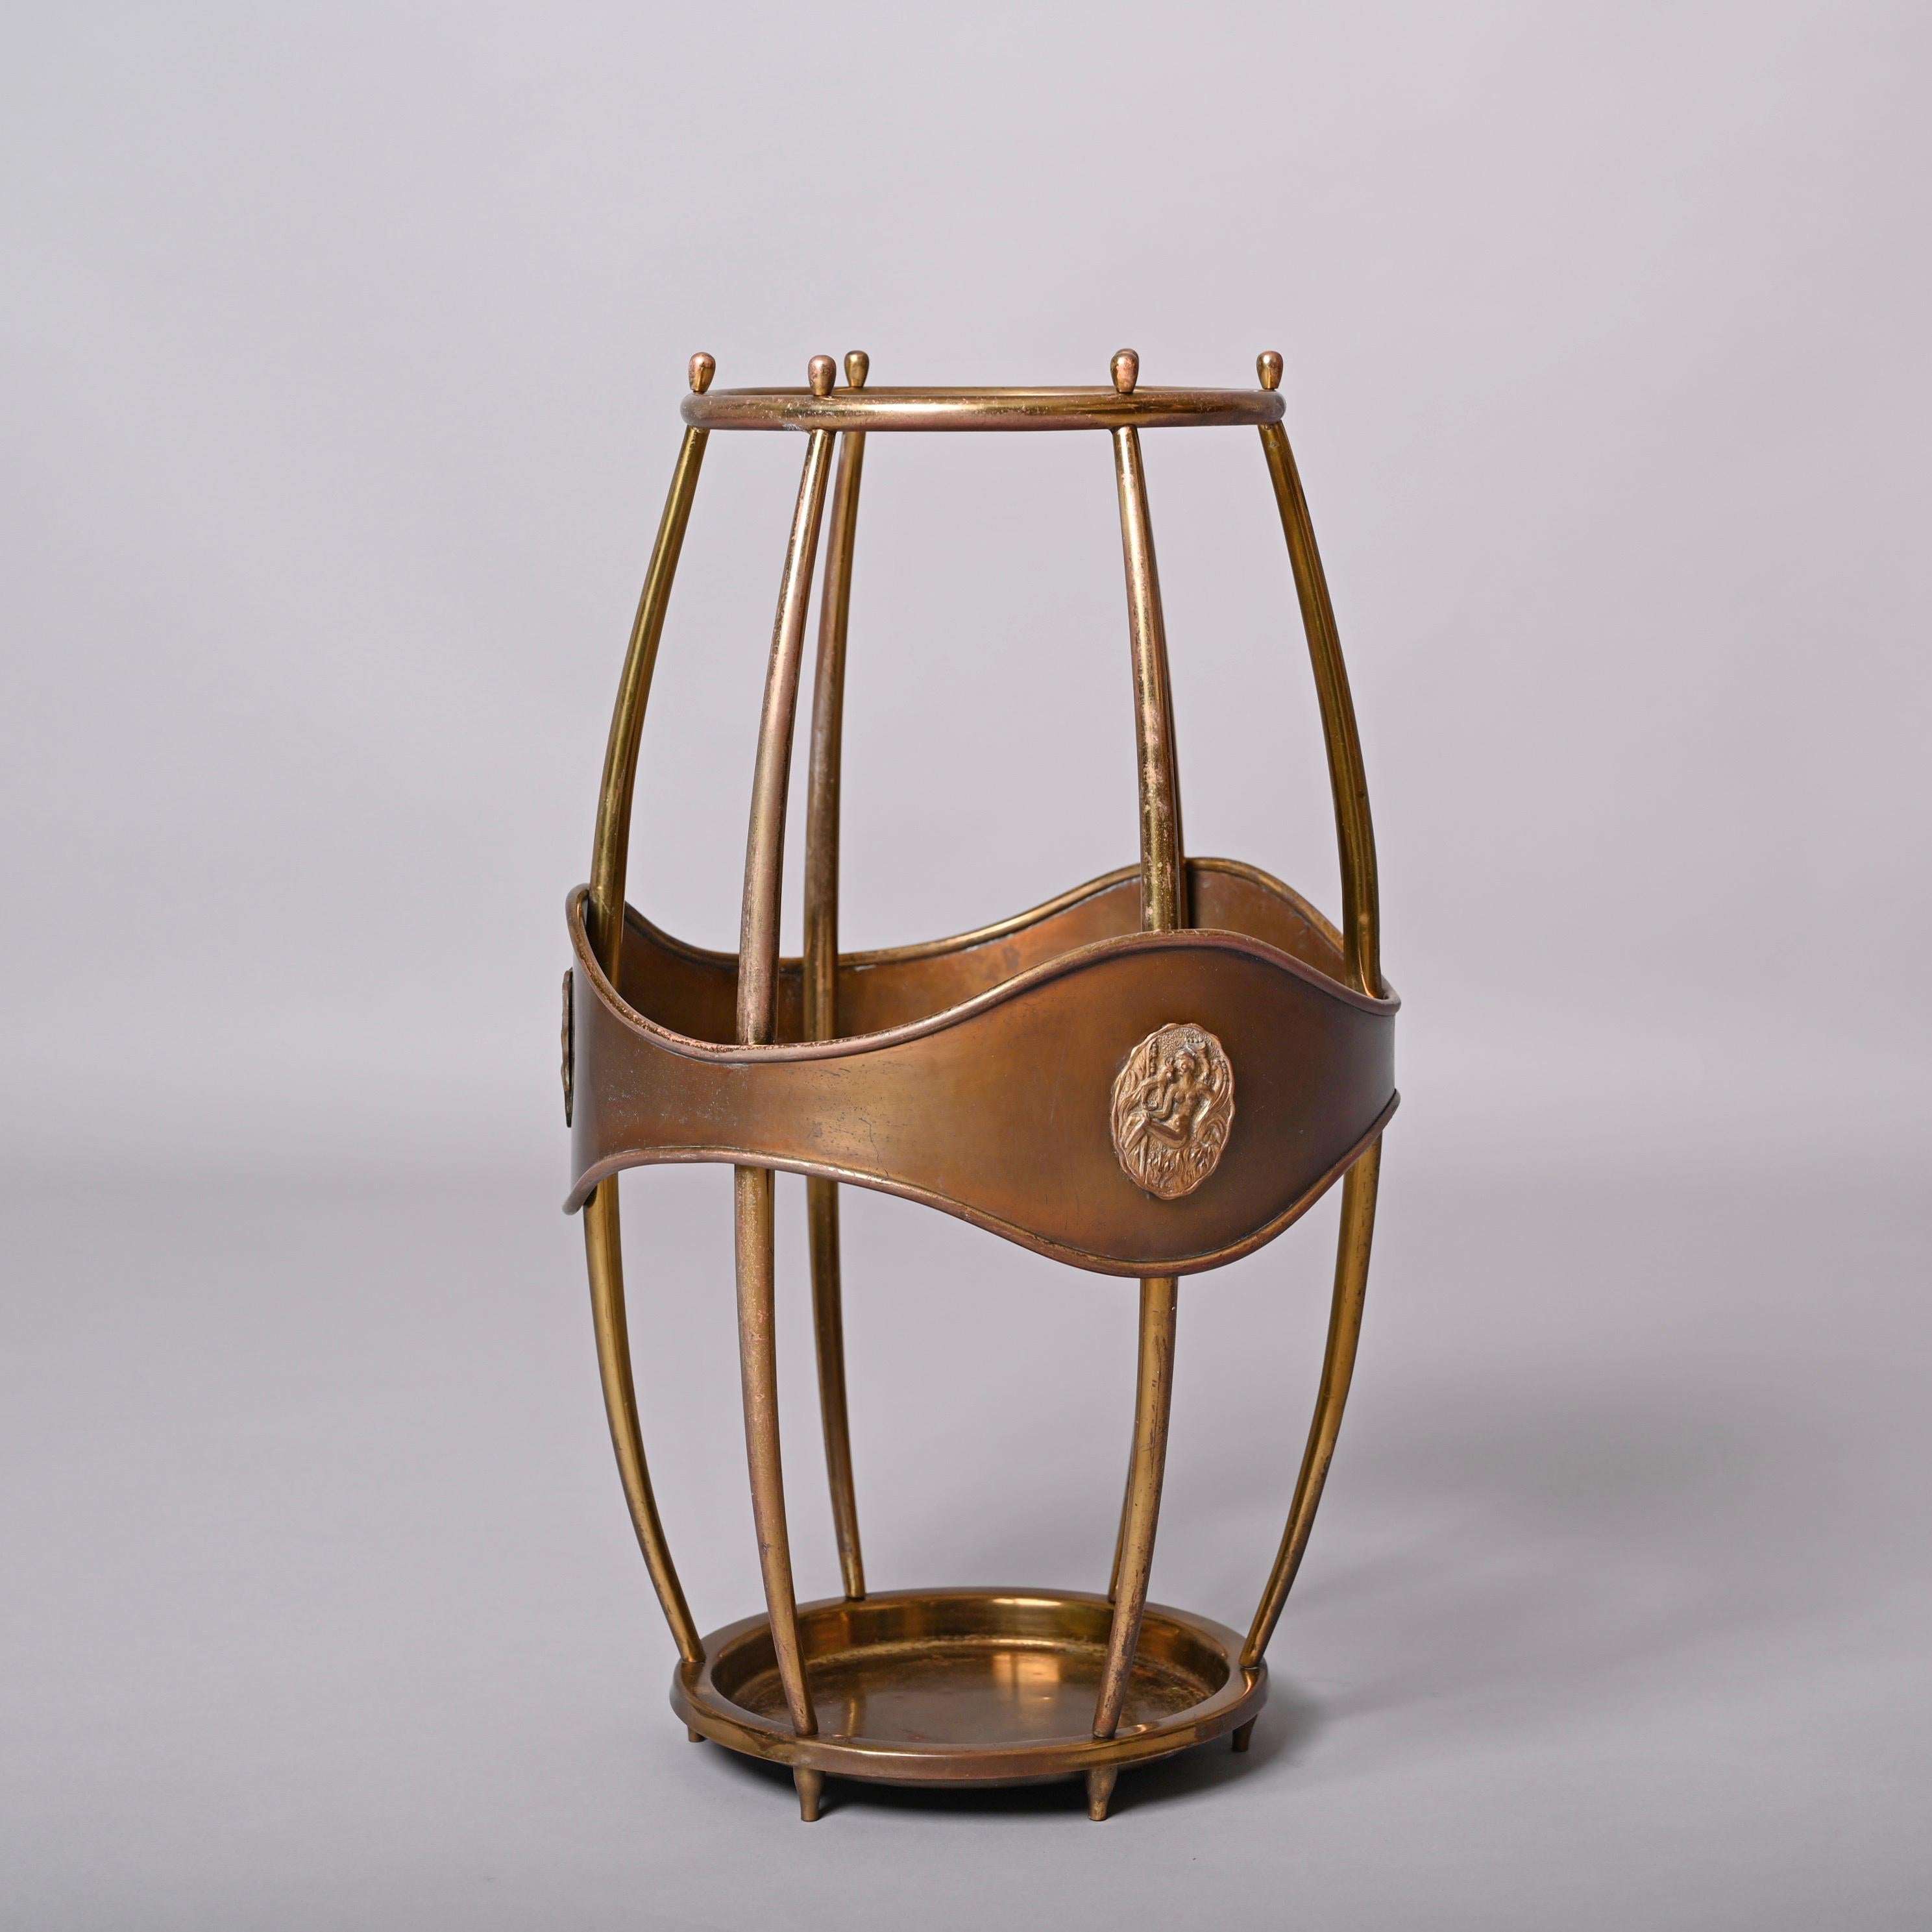 Midcentury Italian Brass Barrell-Shaped Umbrella Stand and Cane Holder, 1950s For Sale 14